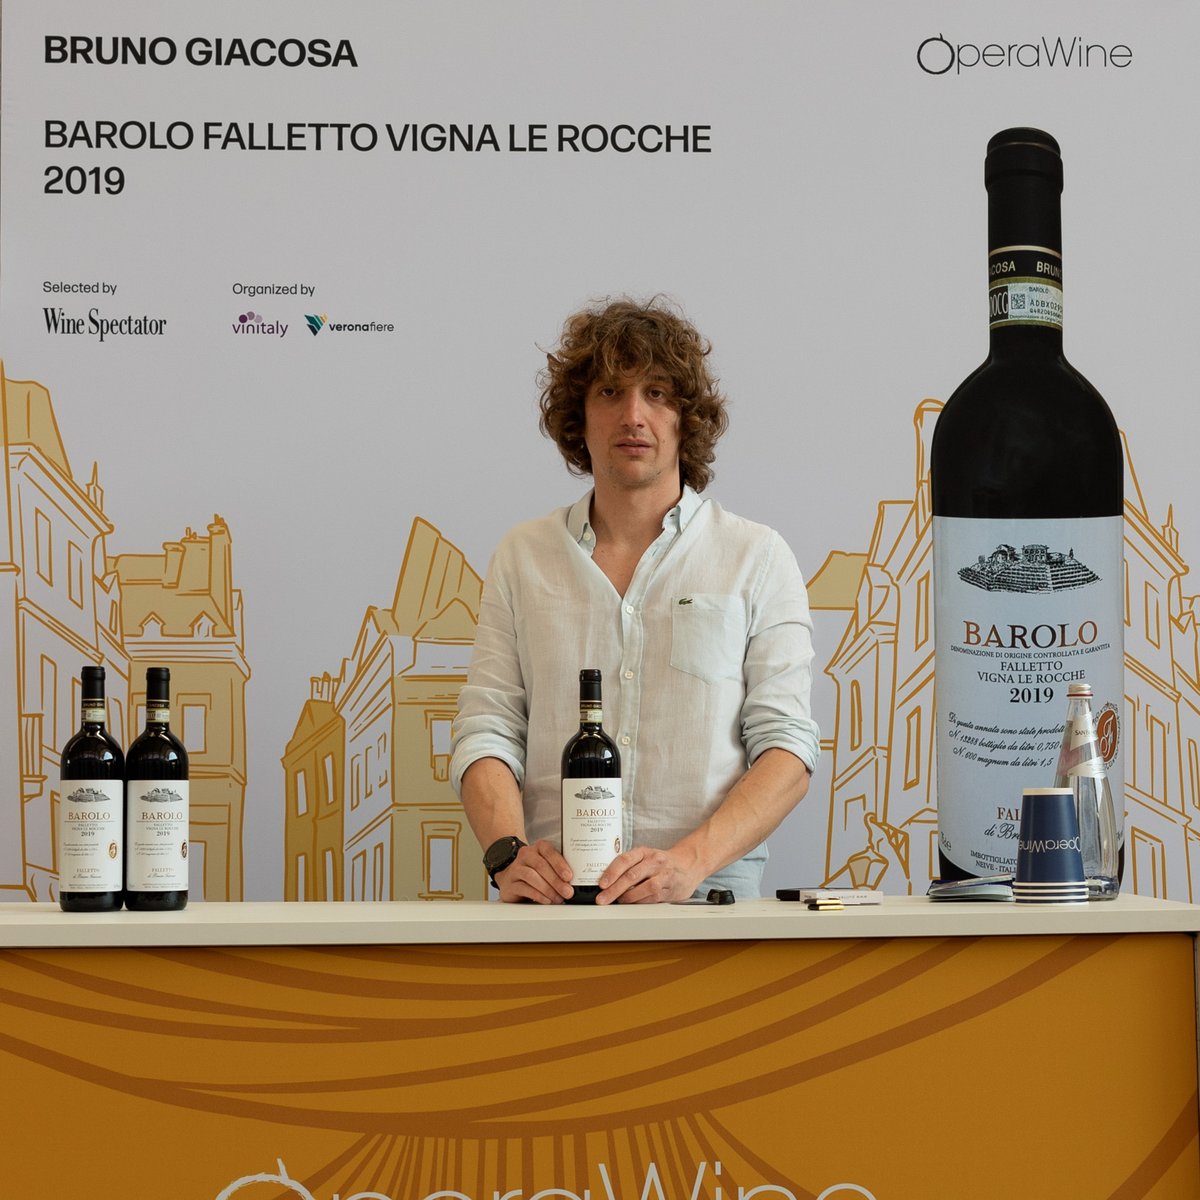 Here is the portrait of Bruno Giacosa, one of the great Italian producers selected by Wine Spectator for #OperaWine2024. During this year's Grand Tasting, they shared with guests their Barolo Falletto Vigna Le Rocche 2019. Congratulations! #WineSpectator #OperaWine #Vinitaly2024